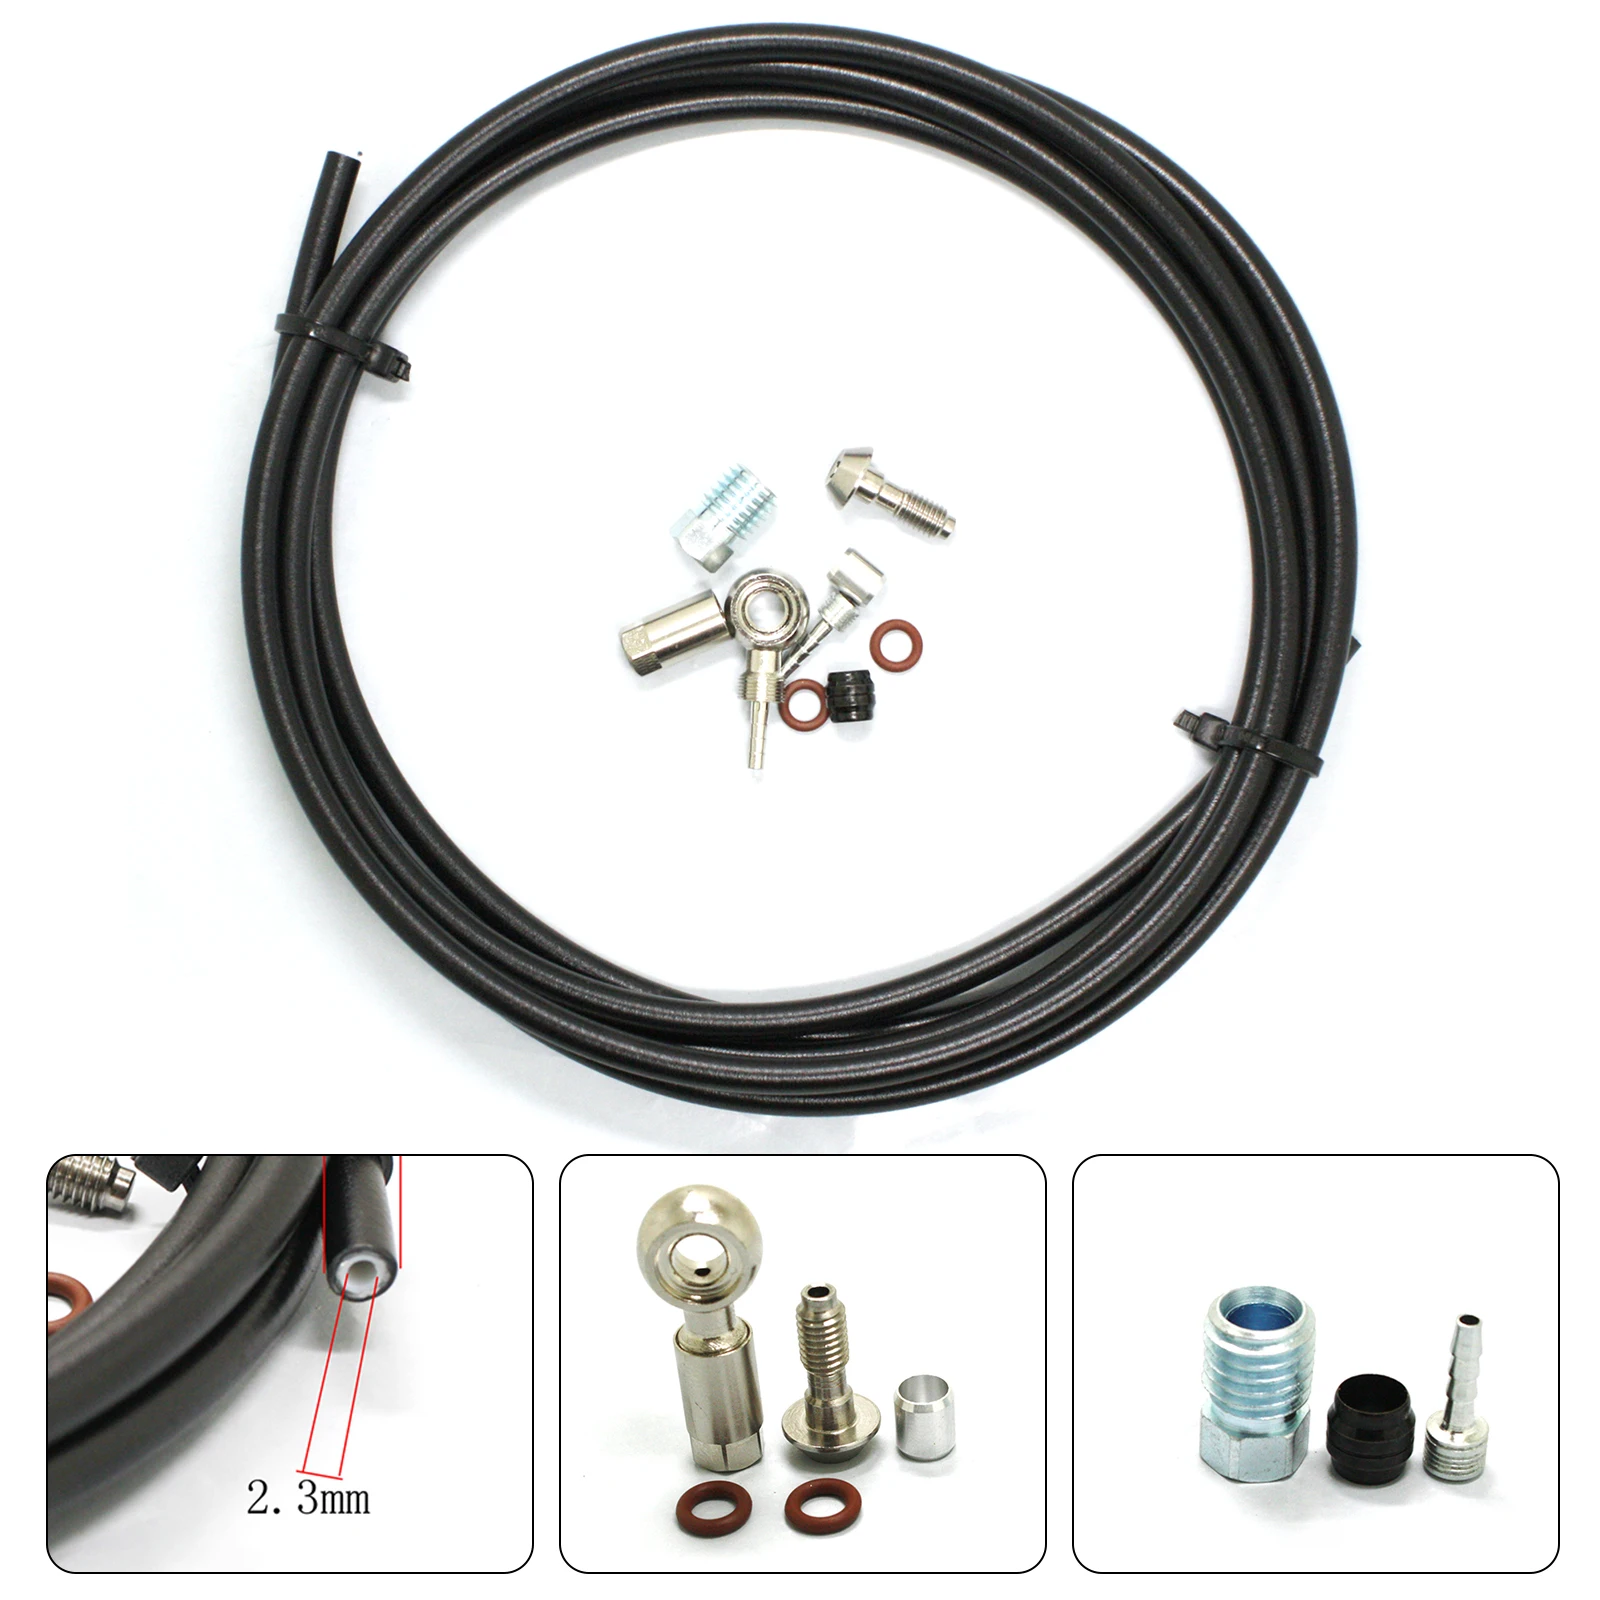 

Durable High Quality Brand New Brake Hose Oil Pipe Practical W/ Screws Kit Five-wire Body For MAGURA MT5 MT6 MT7MT8